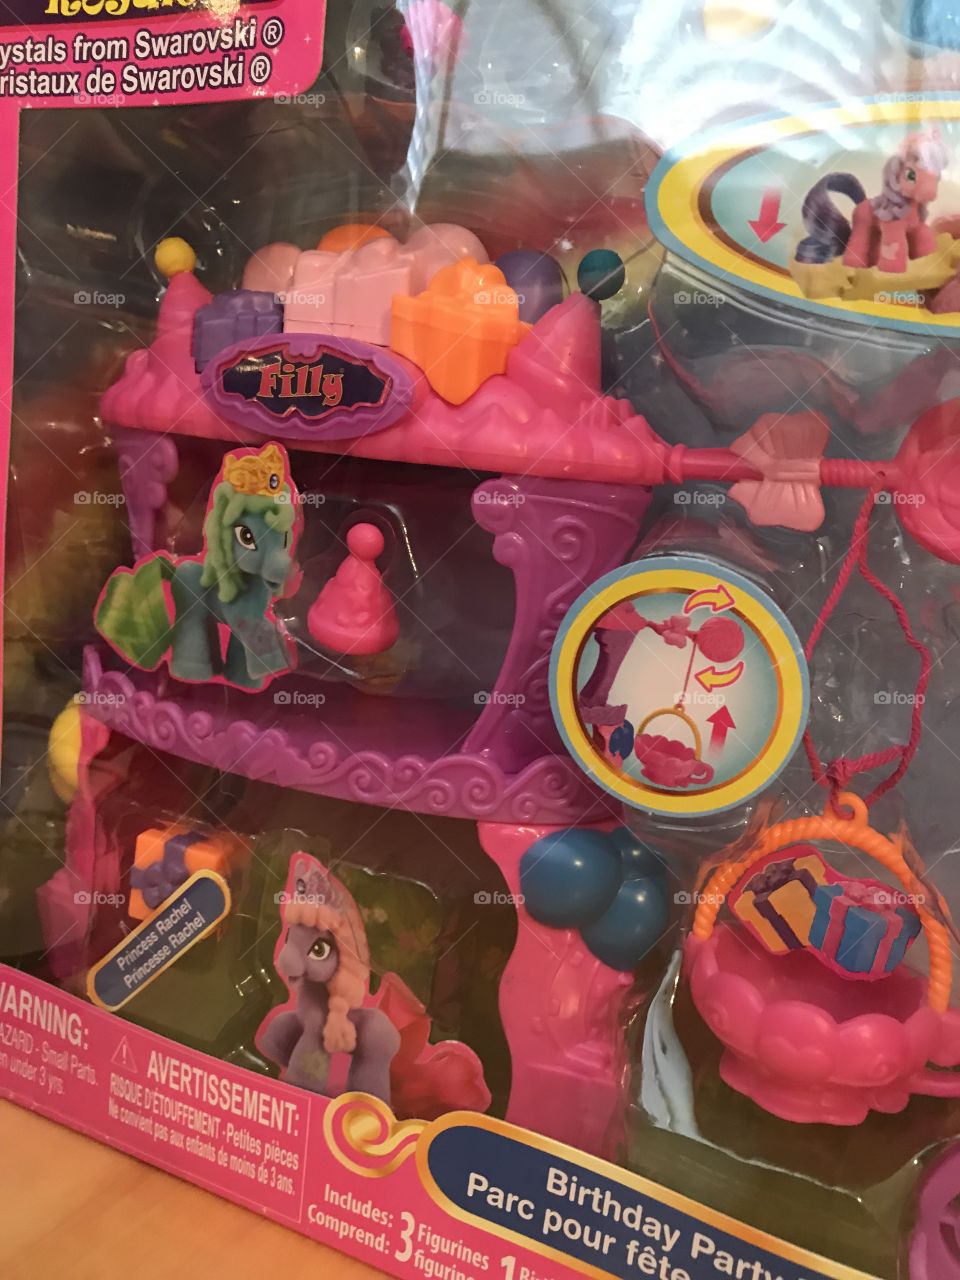 A closeup of a boxed Filly Royale playset, brightly colored